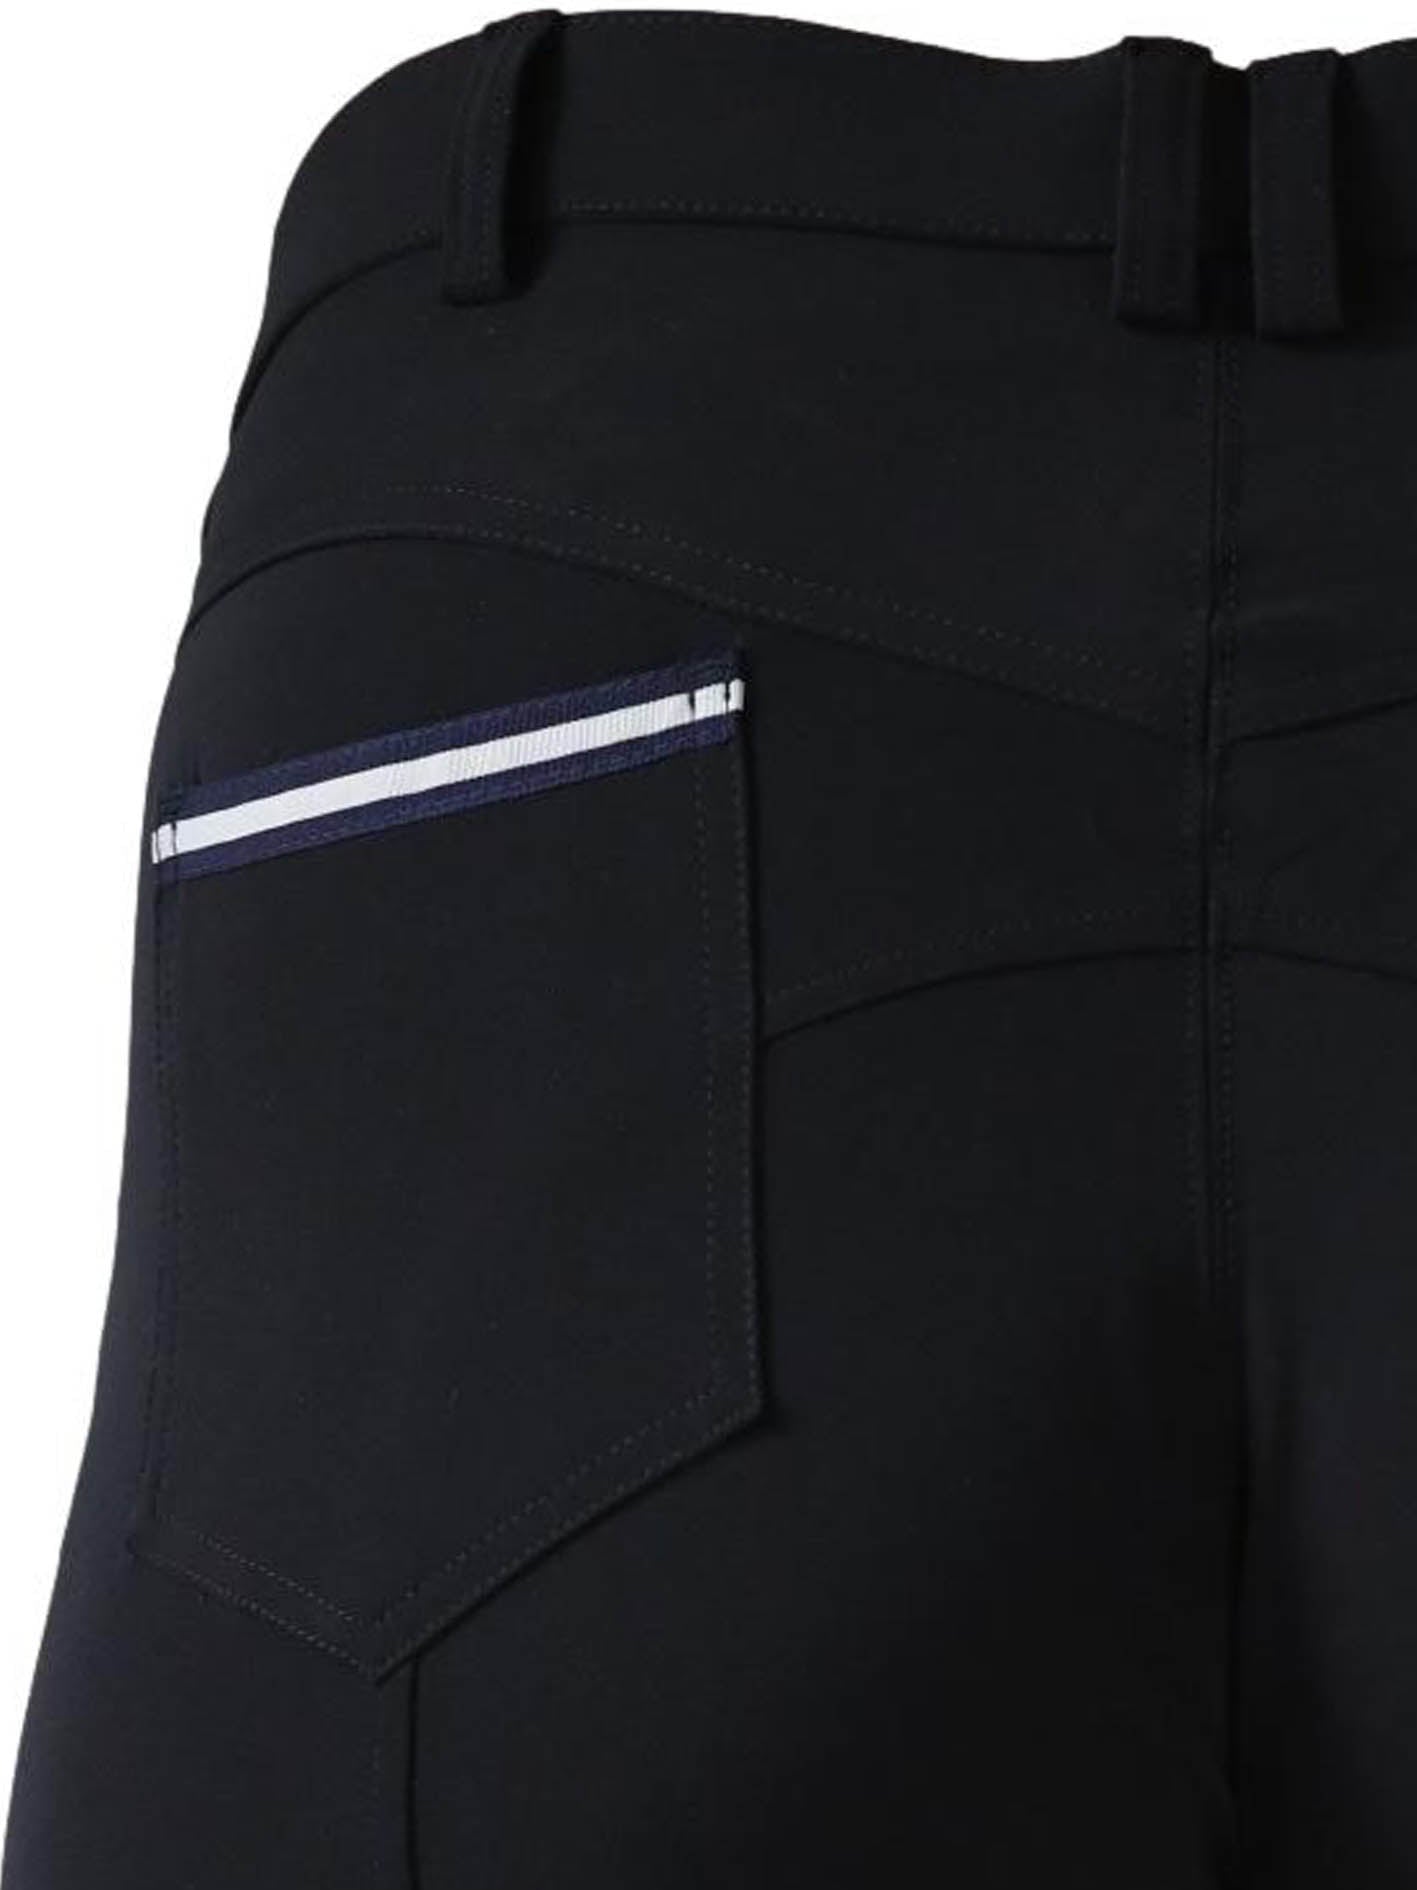 CoolMax Black Breeches in sizes 6 to 28 - With Silicone Seat Grip-Plum Tack-The Equestrian